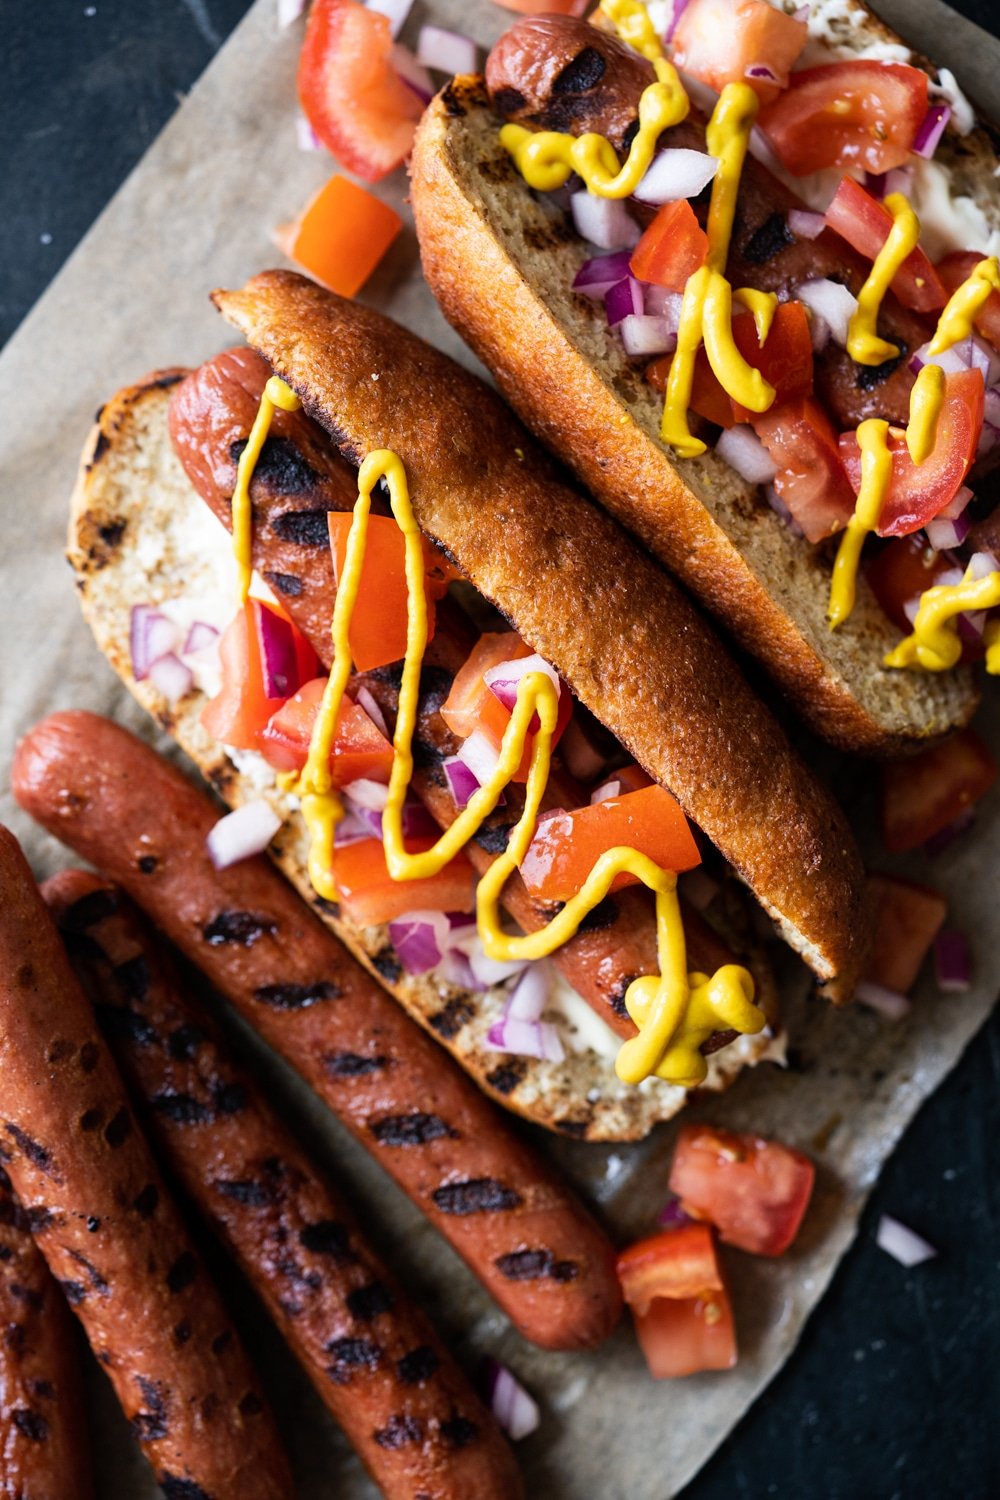 Keto hot dogs with fluffy yeast buns, pico de gallo salsa and a drizzle of mustard